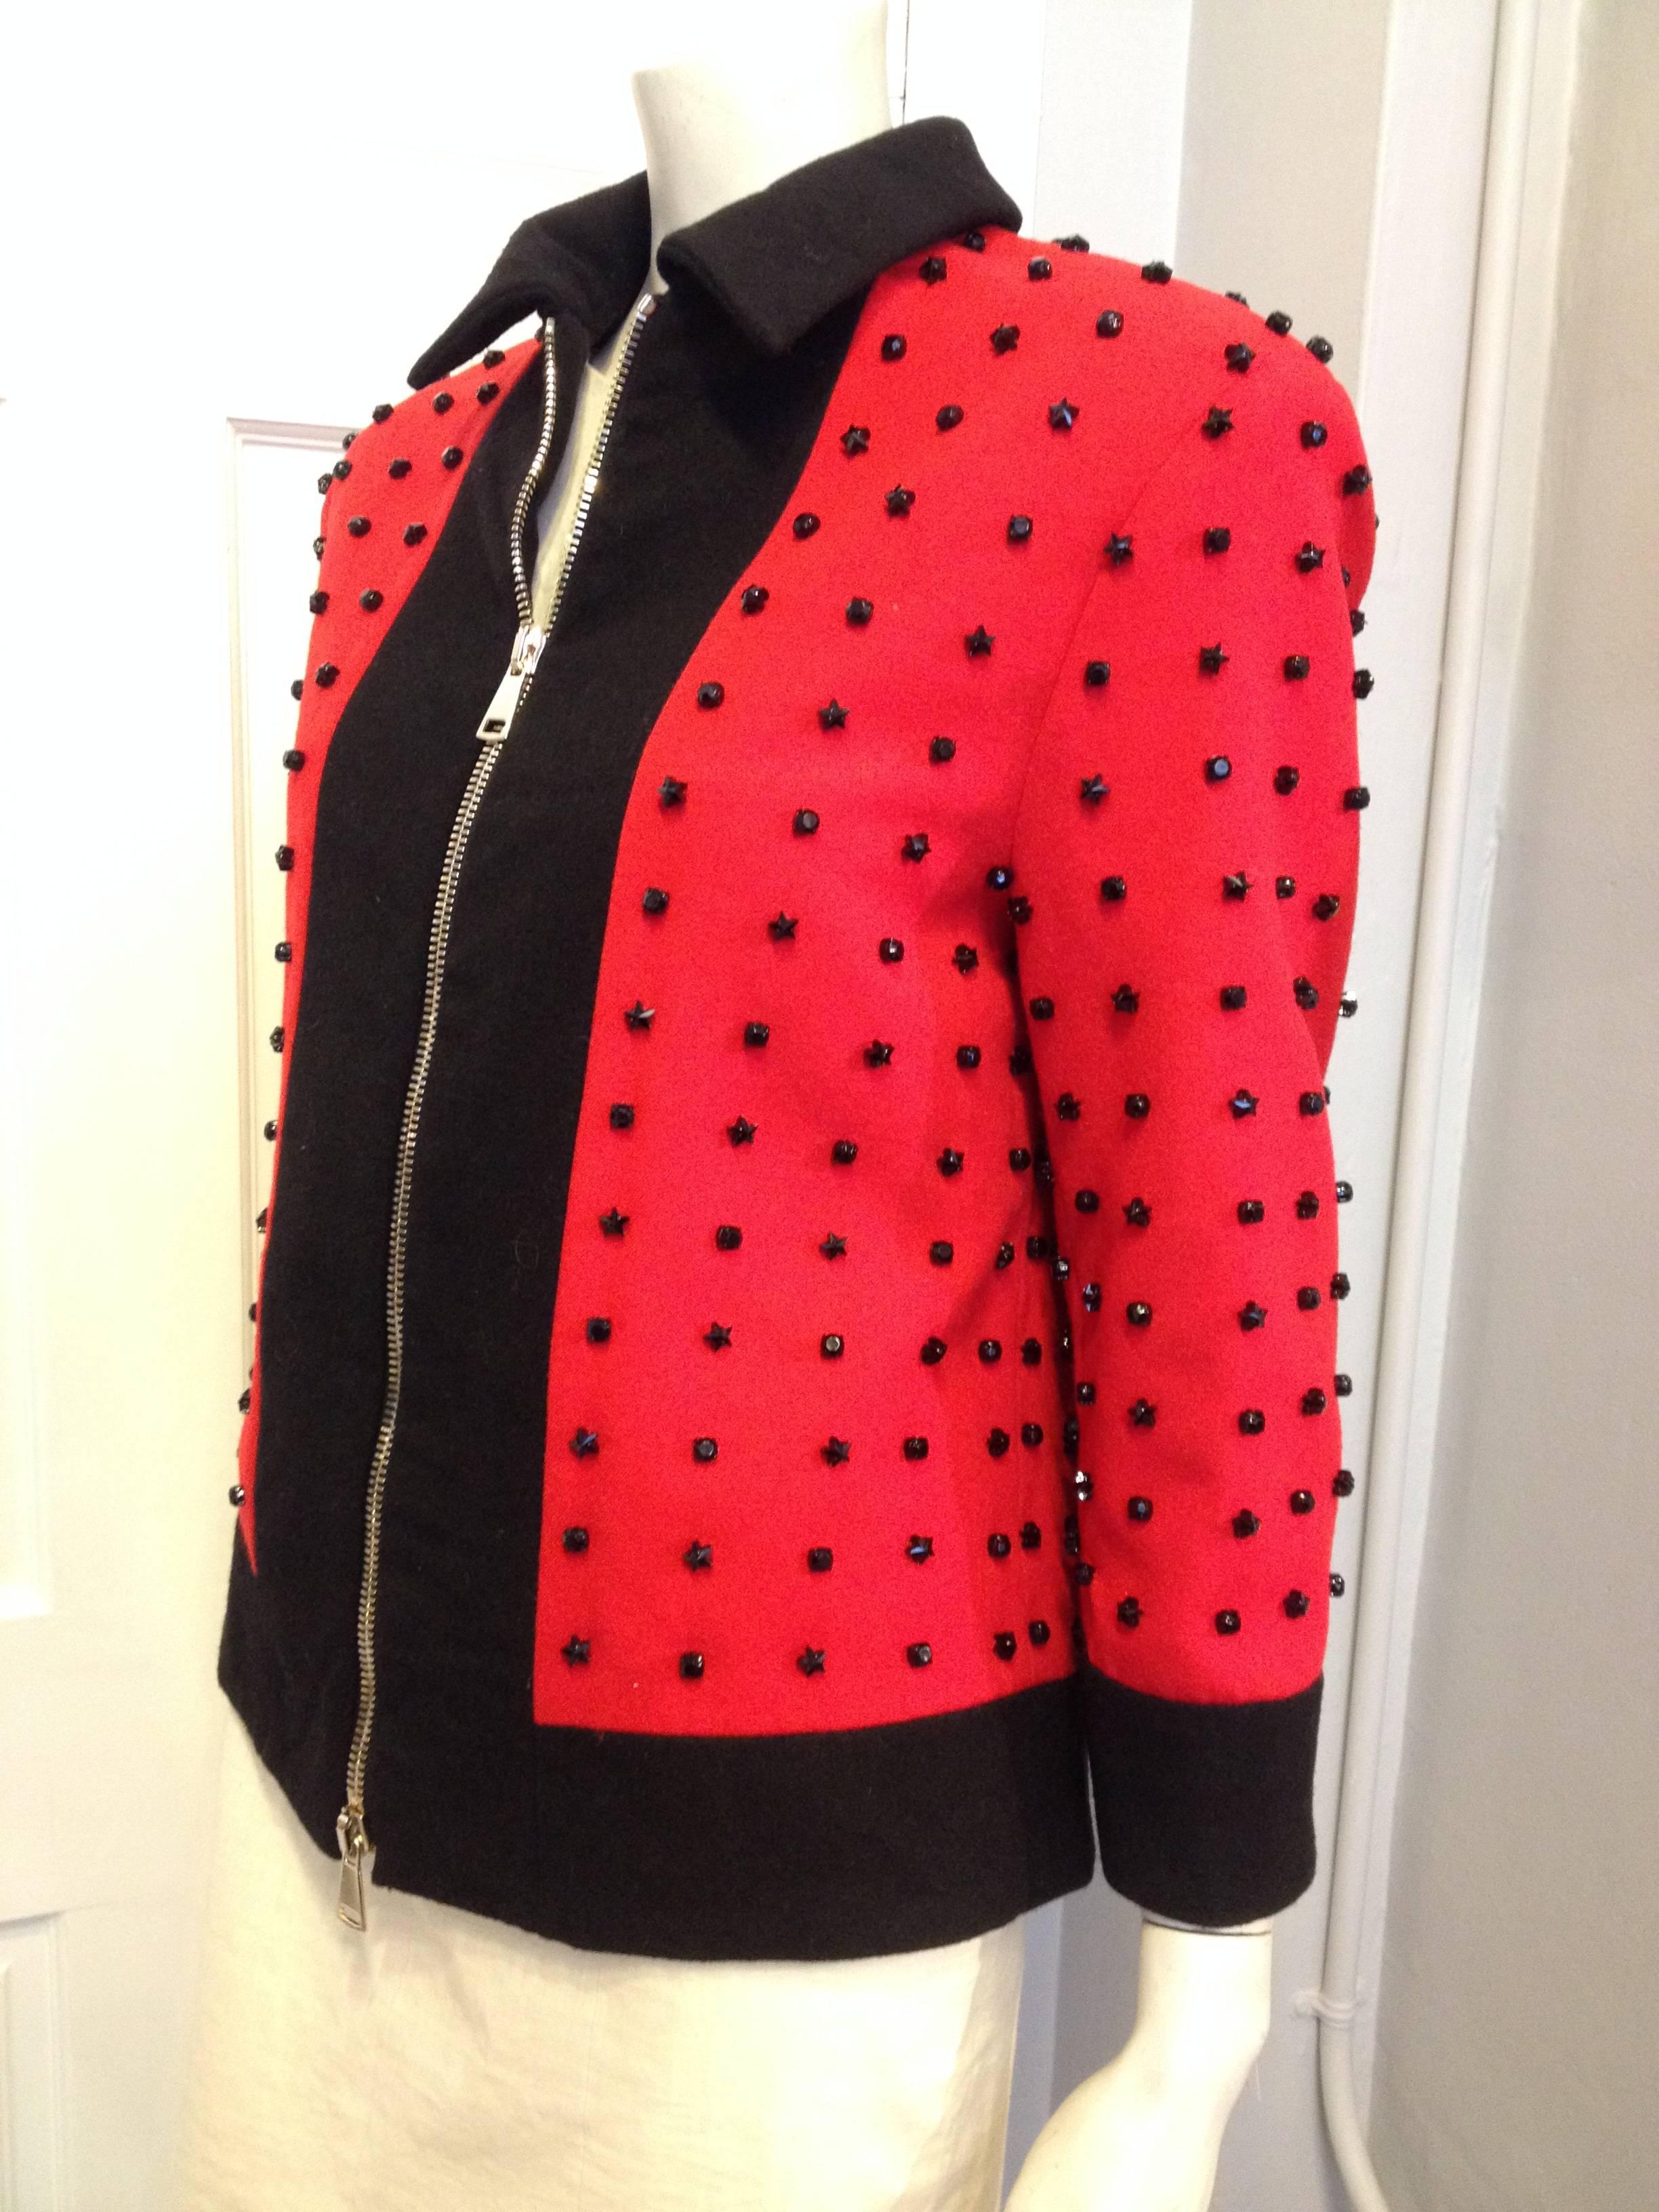 This Givenchy jacket has literal star power. A runway piece from the Autumn 2012-2013 menswear collection (look 39), it's so rock n roll - the bright red fabric is studded with a grid of three-dimensional prong-set star-shaped black rhinestones. The